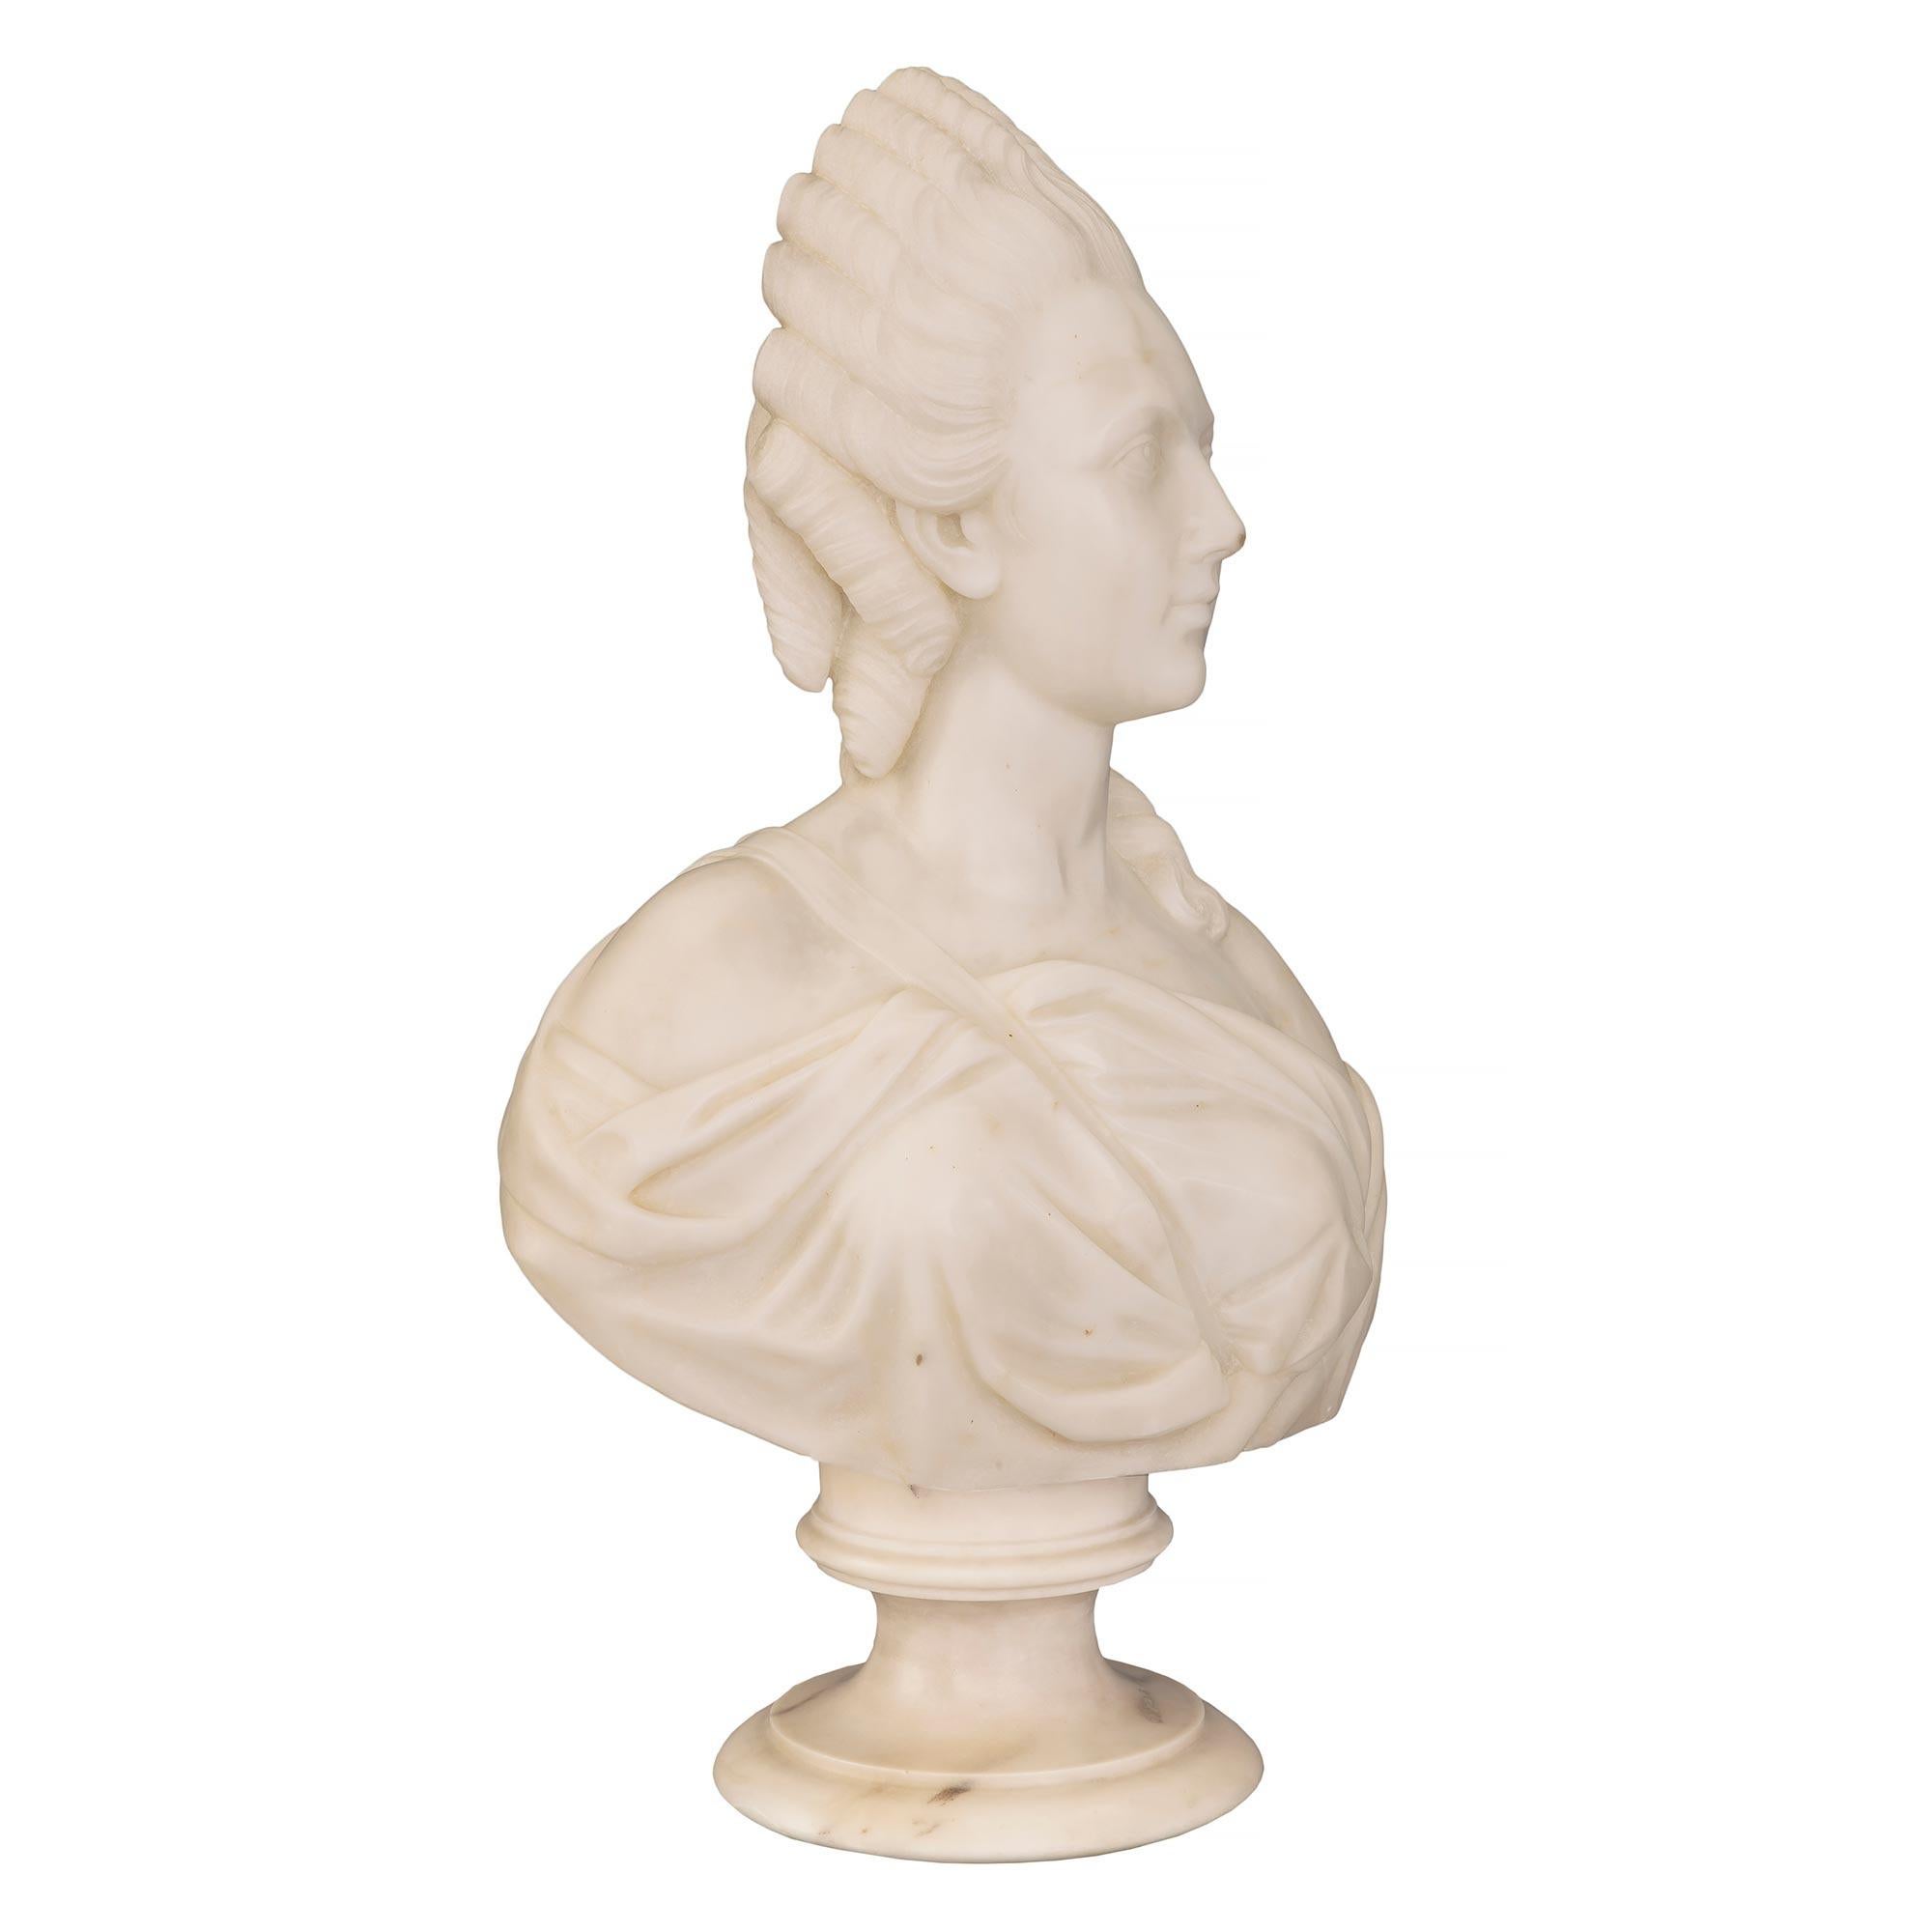 A beautiful French 19th century white Carrara marble bust of Marie Antoinette. The bust is raised by an fine circular mottled socle pedestal. The richly sculpted bust depicts Marie Antoinette draped in an elegant flowing garment and wears her hair